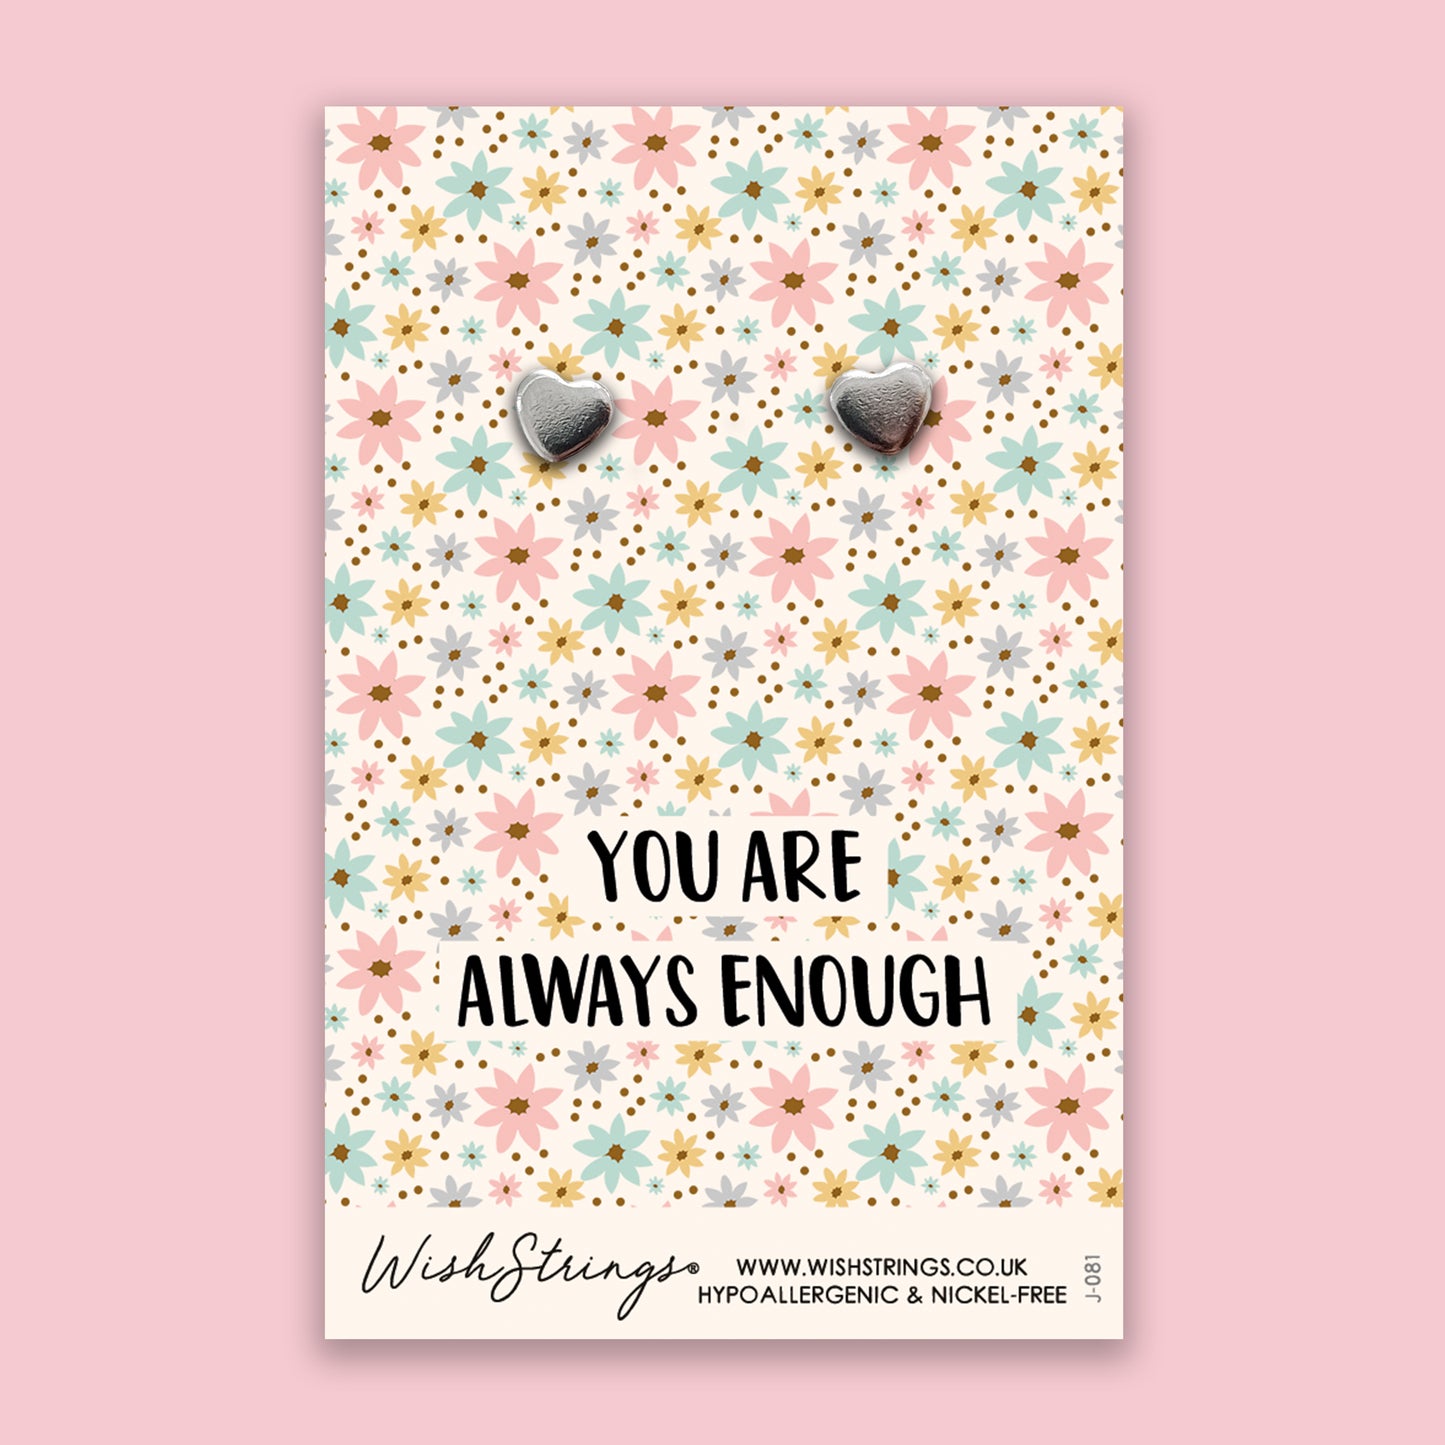 You are always enough - Silver Heart Stud Earrings | 304 Stainless - Hypoallergenic